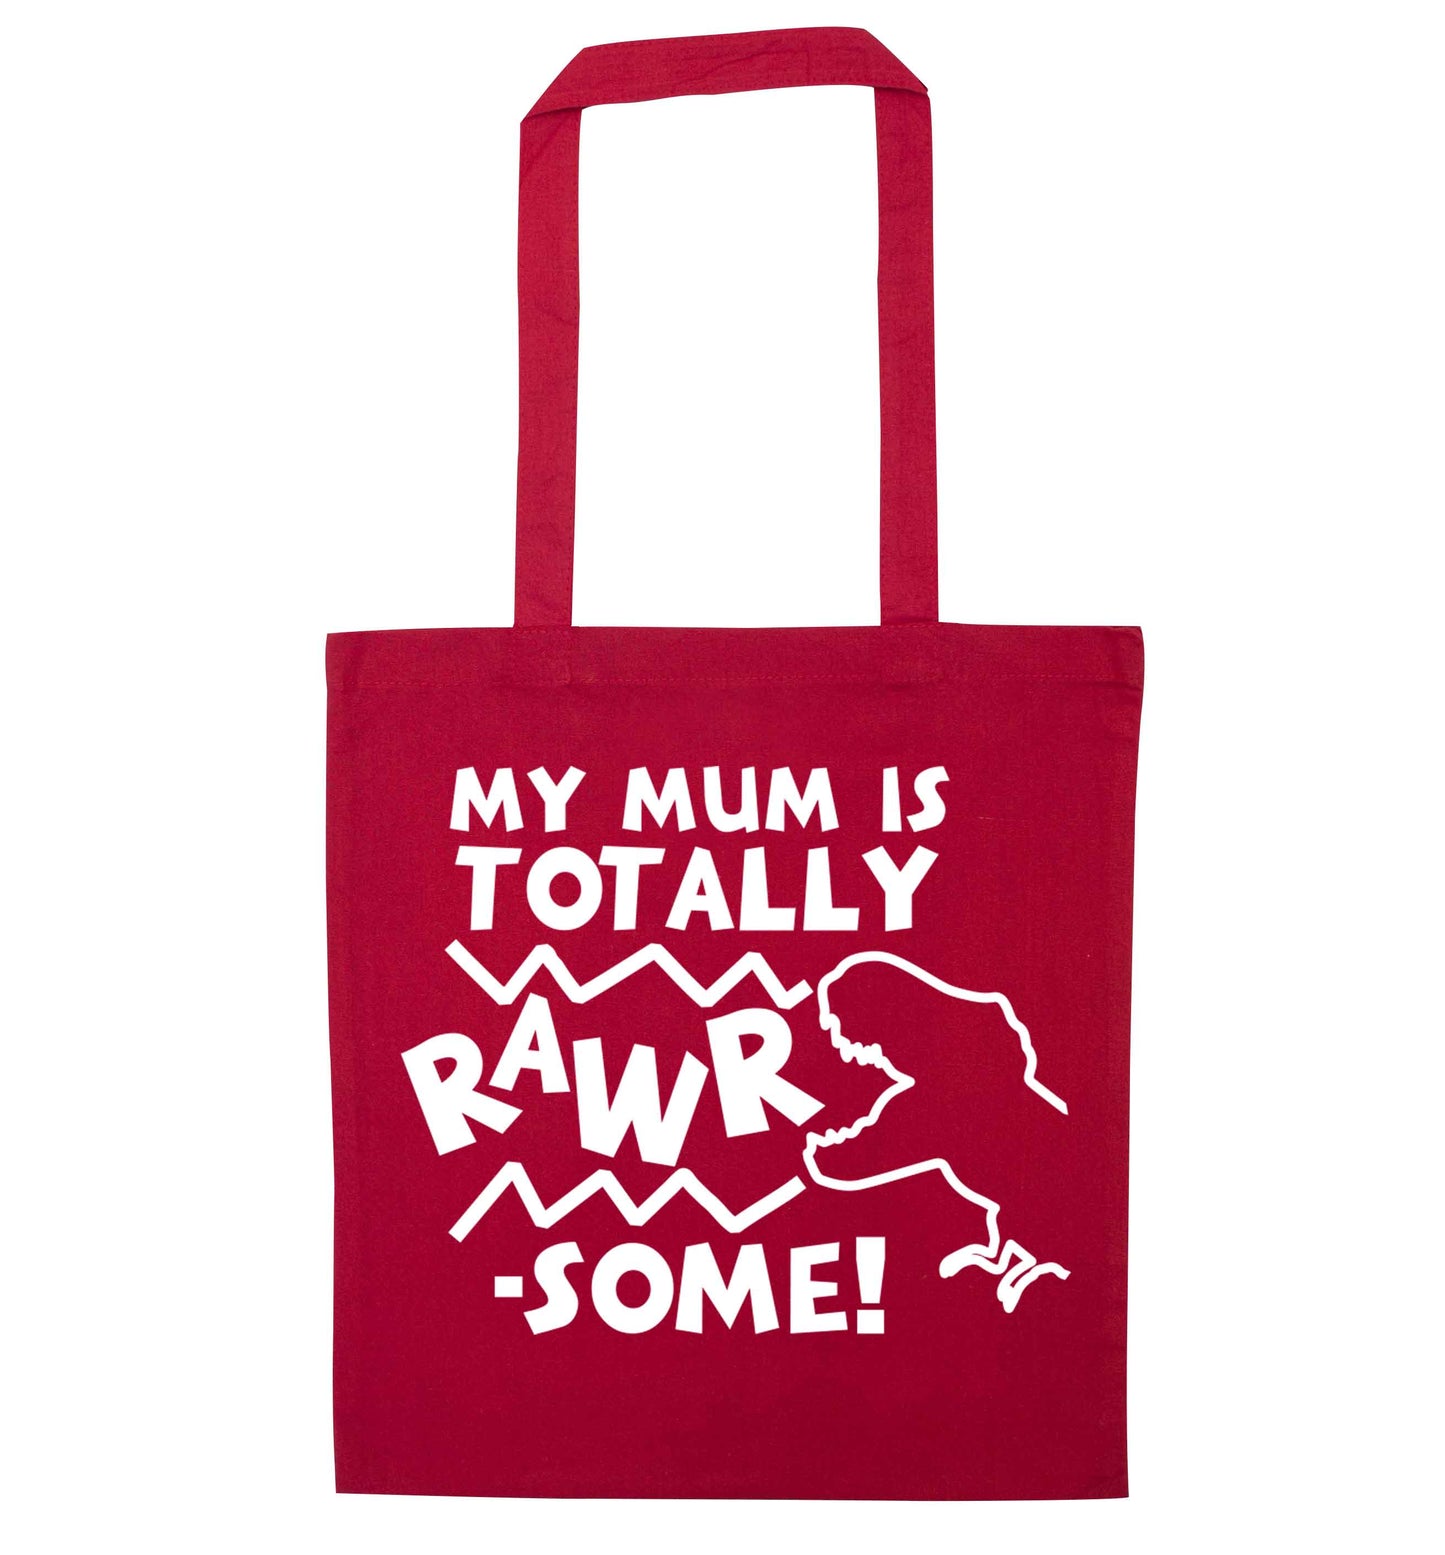 My mum is totally rawrsome red tote bag